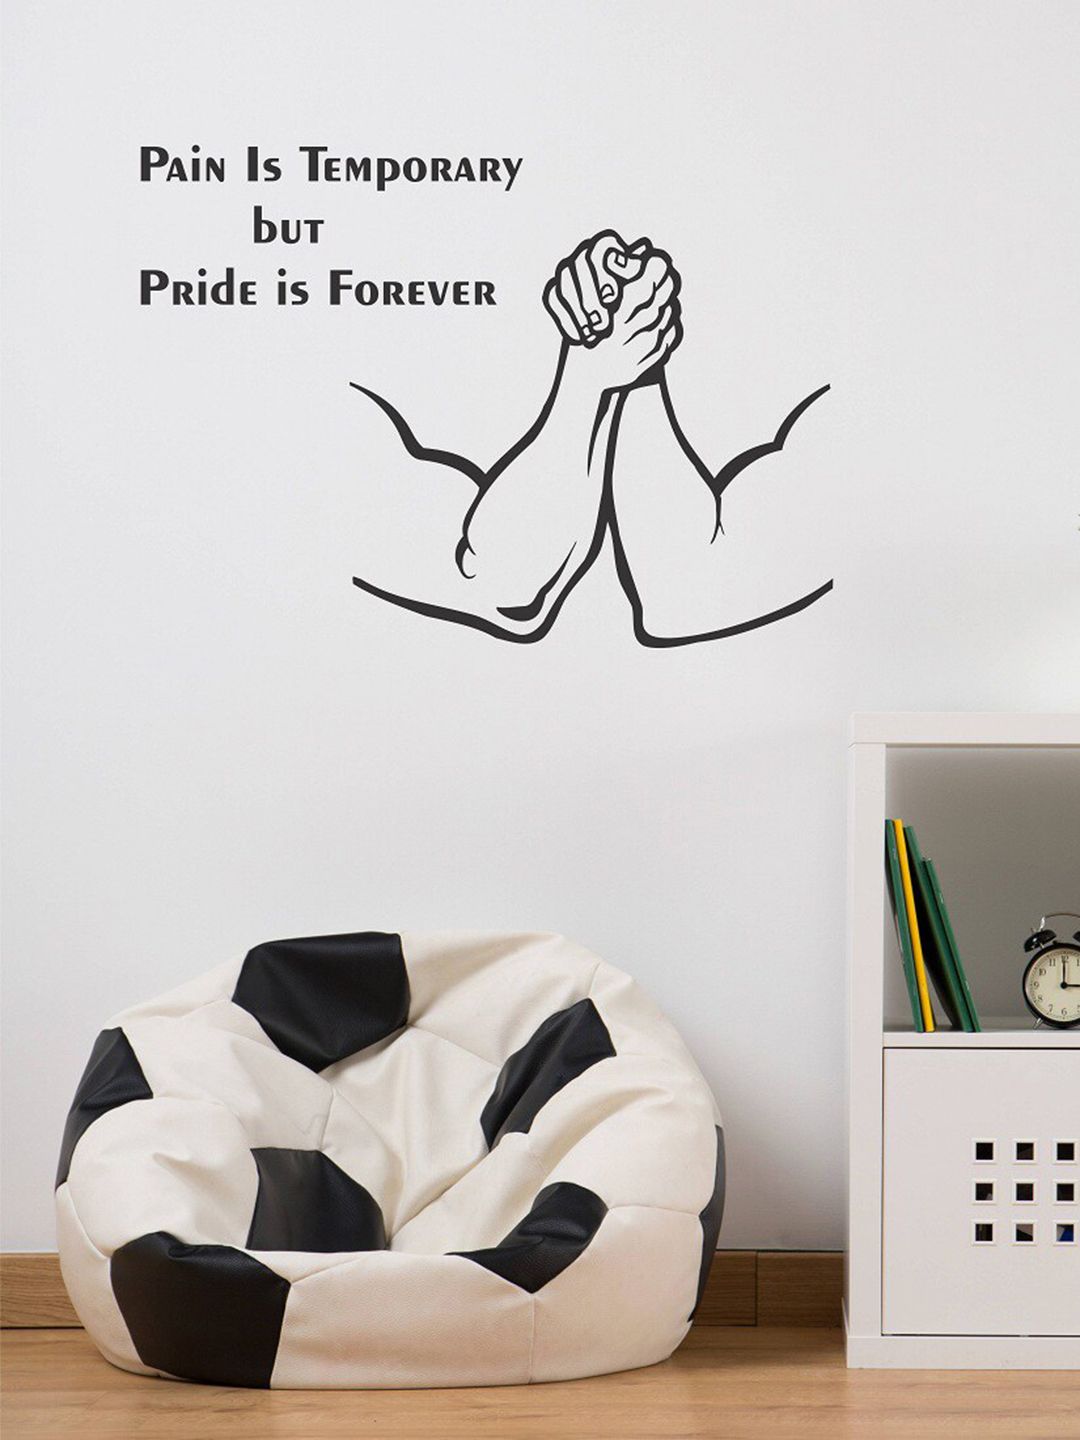 WALLSTICK Black Motivational Quotes Wall Stickers Price in India